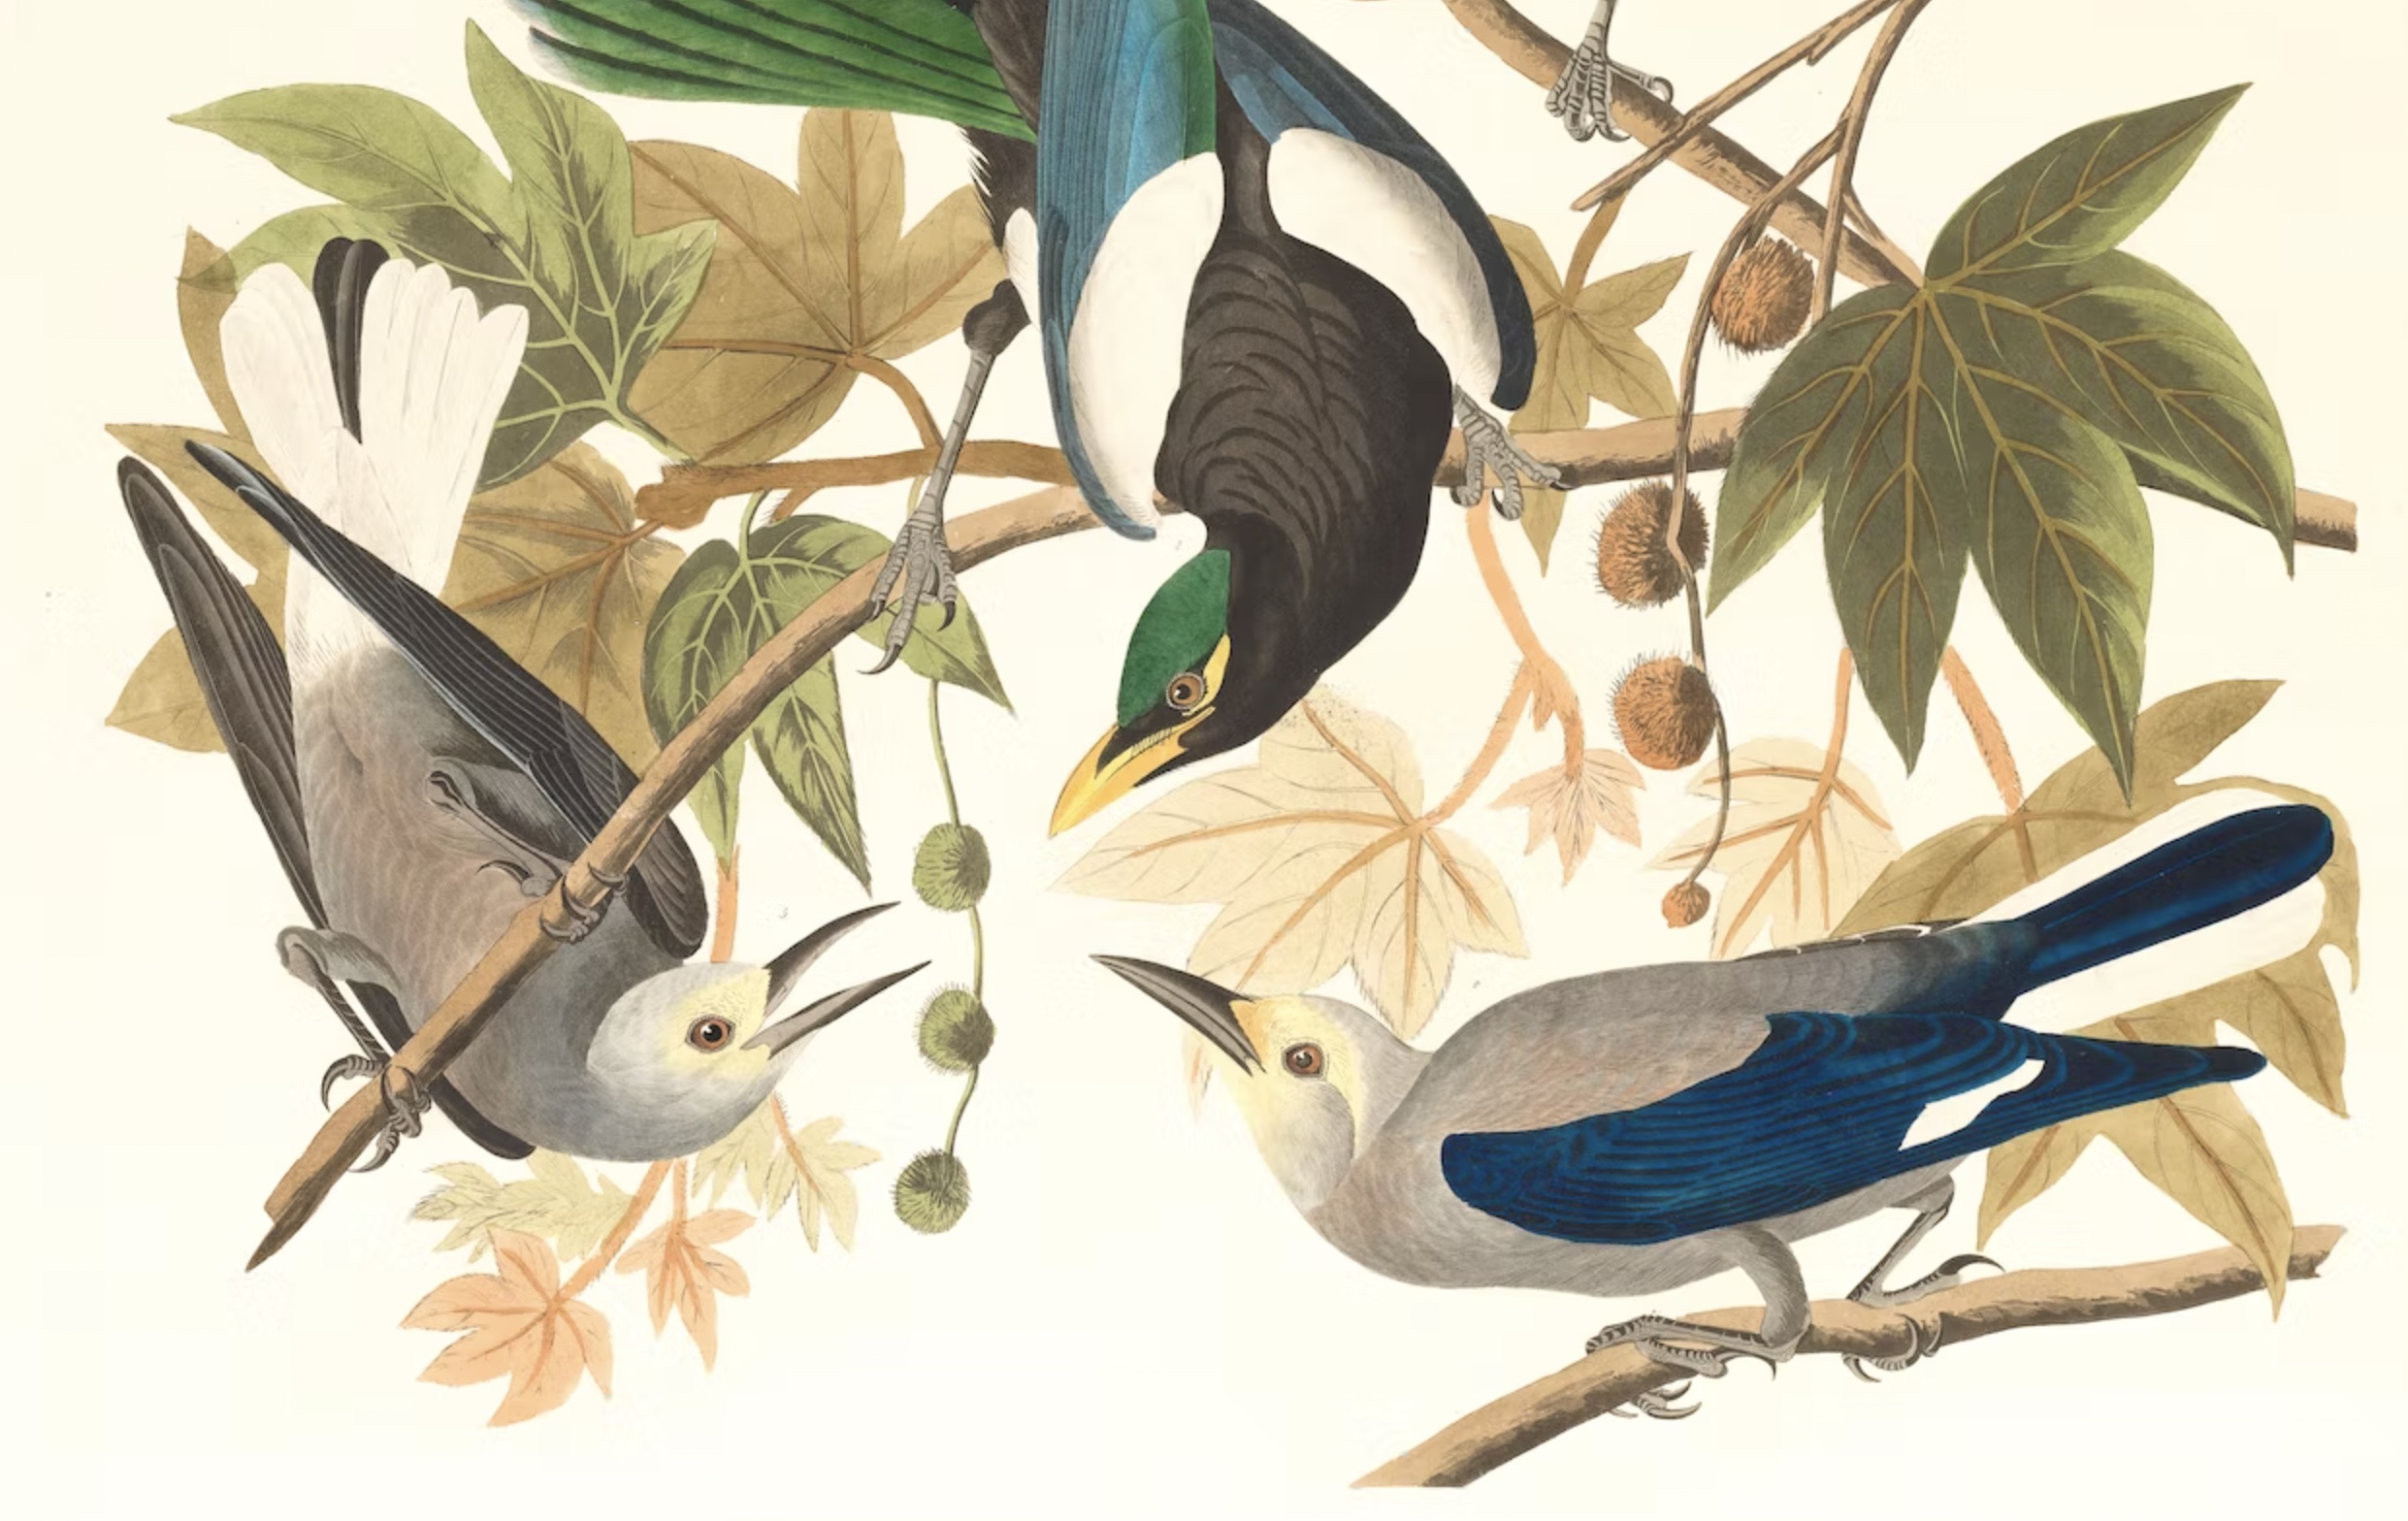 A calming illustration of three birds perched on branches, facing each other